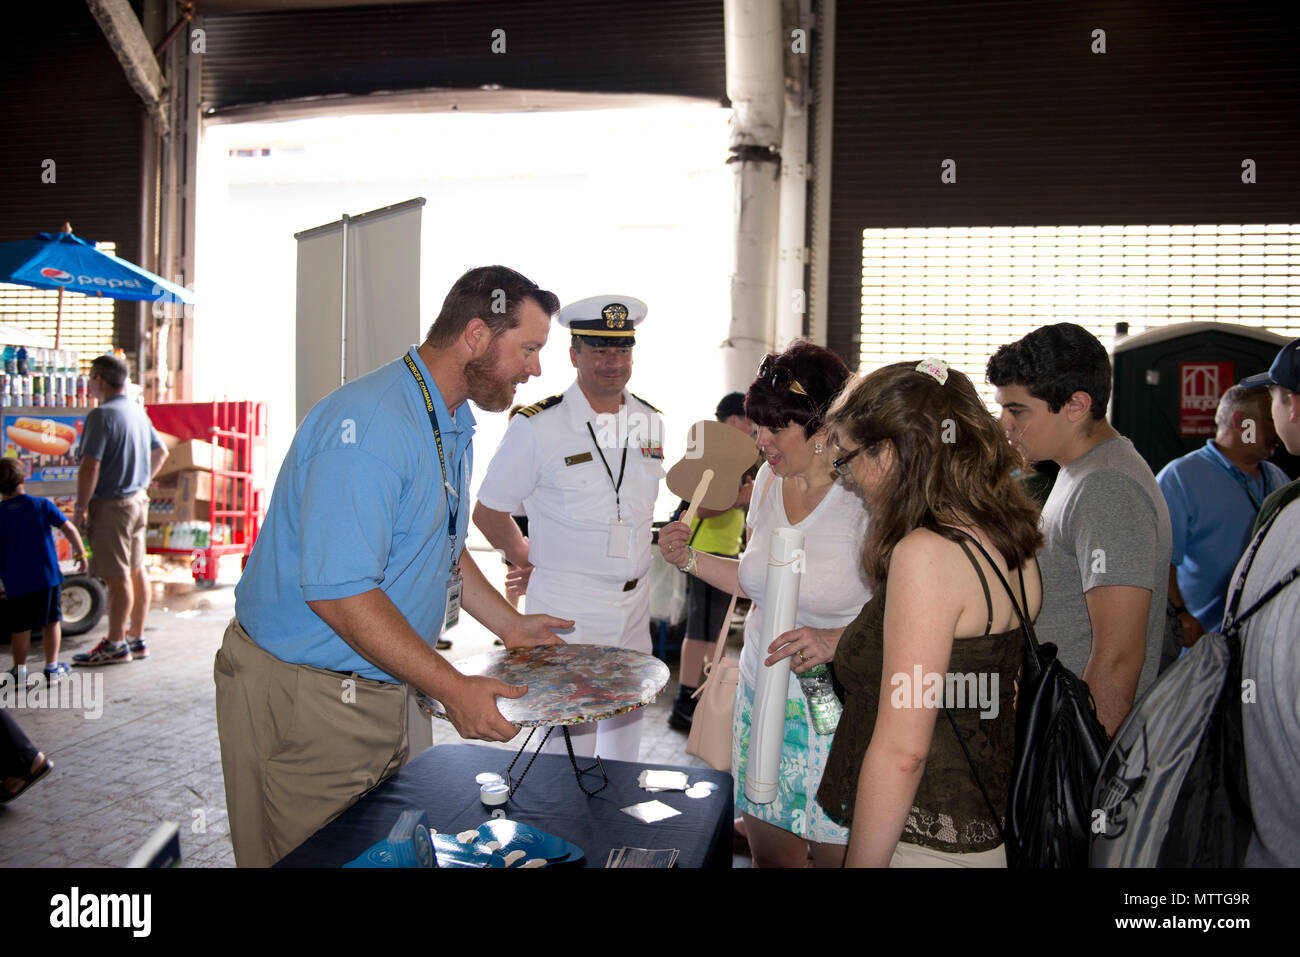 180526-N-IT235-0087 NEW YORK (May 26, 2018) Michael Jones, the environmental resources and planning section head for U.S. Fleet Forces Command’s Fleet Environmental and Readiness Division, explains the shipboard waste process to reduce plastic waste aboard ships at the U.S. Navy’s “Stewards of the Sea: Defending Freedom, Protecting the Environment” exhibit during Fleet Week New York. The Navy employs every means available to mitigate the potential environmental effects of our activities without jeopardizing the safety of our Sailors or impacting our Navy readiness mission. (U.S. Navy photo by  Stock Photo